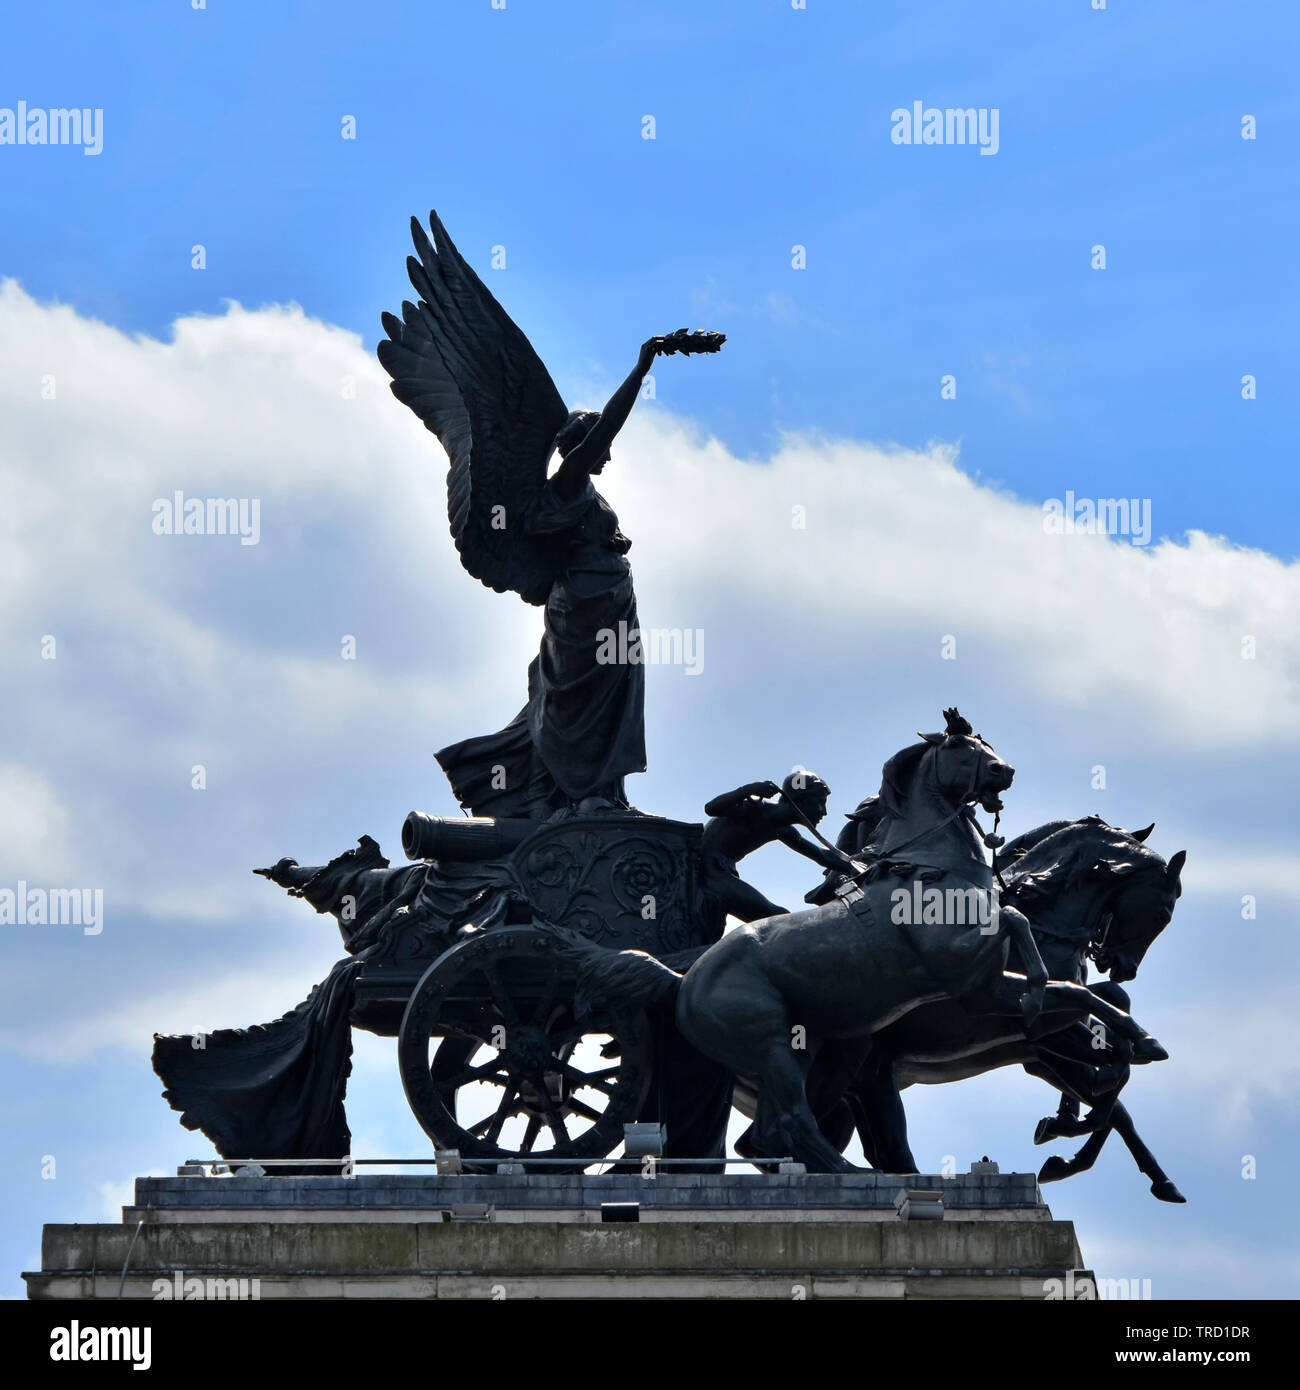 Close up silhouette of The bronze Quadriga chariot statue above Wellington or Constitution Arch a triumphal arch at Hyde Park Corner London England UK Stock Photo